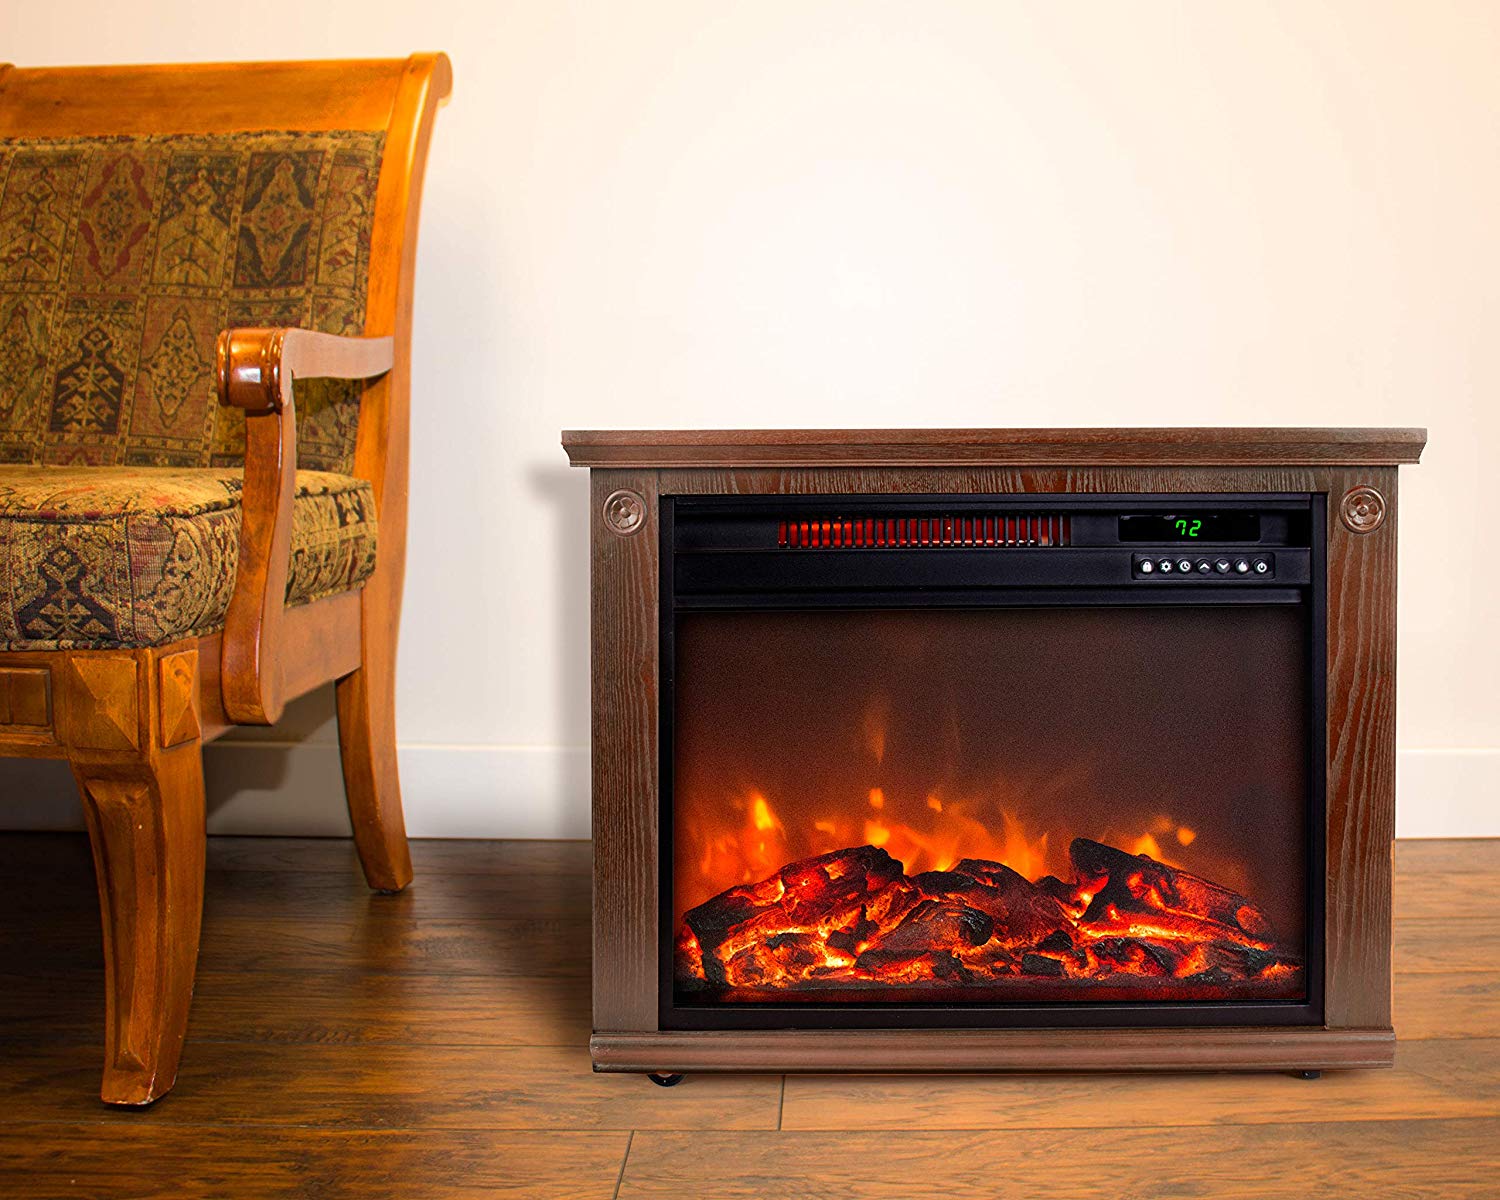 Best Electric Fireplace (Review and Buying Guide)